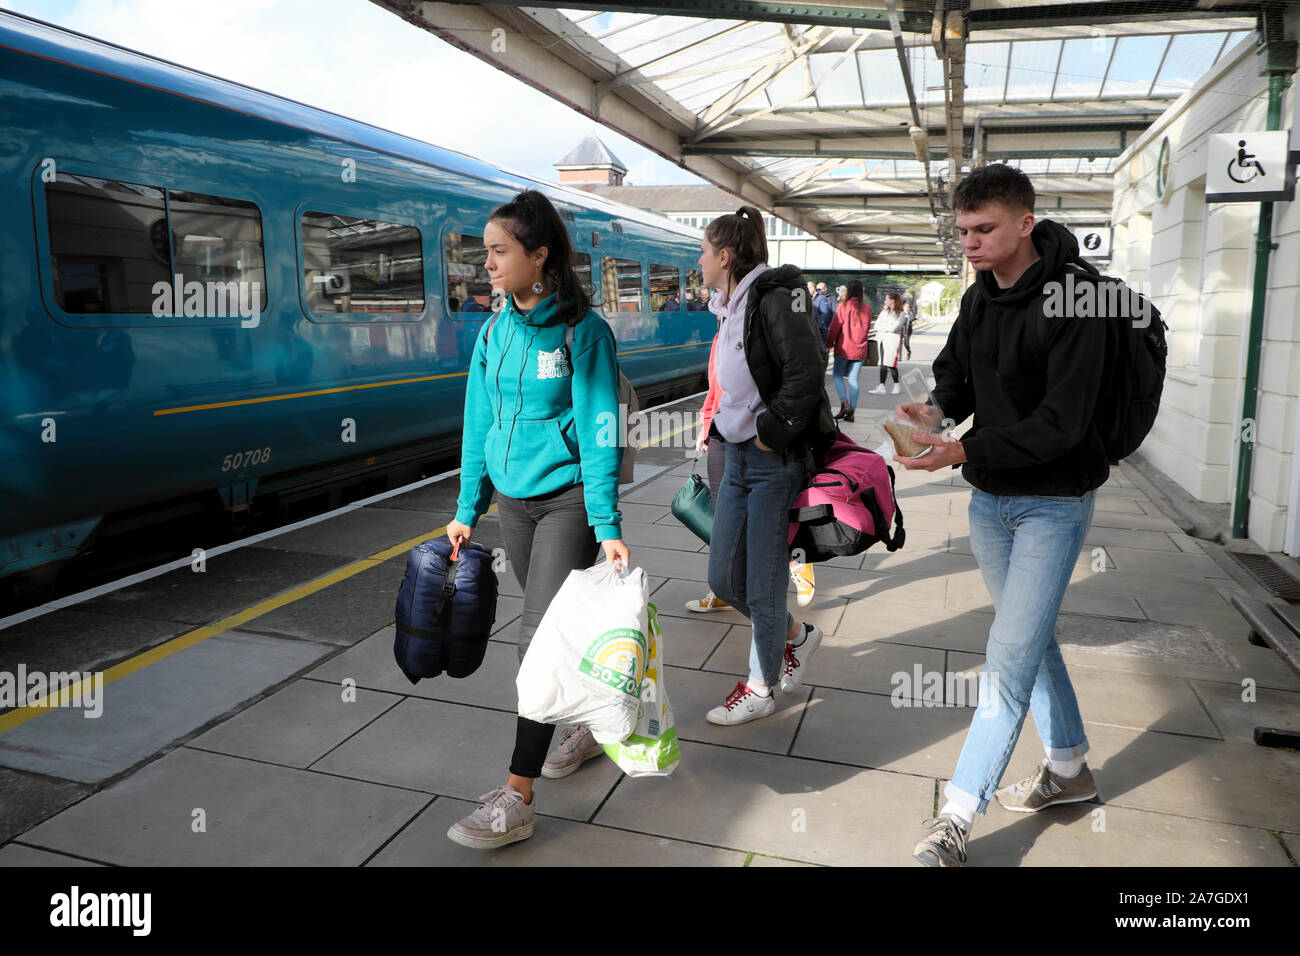 Young people women students with rucksacks and bags getting on KeolisAmey run train at Bangor railway station in Gwynedd North Wales UK  KATHY DEWITT Stock Photo